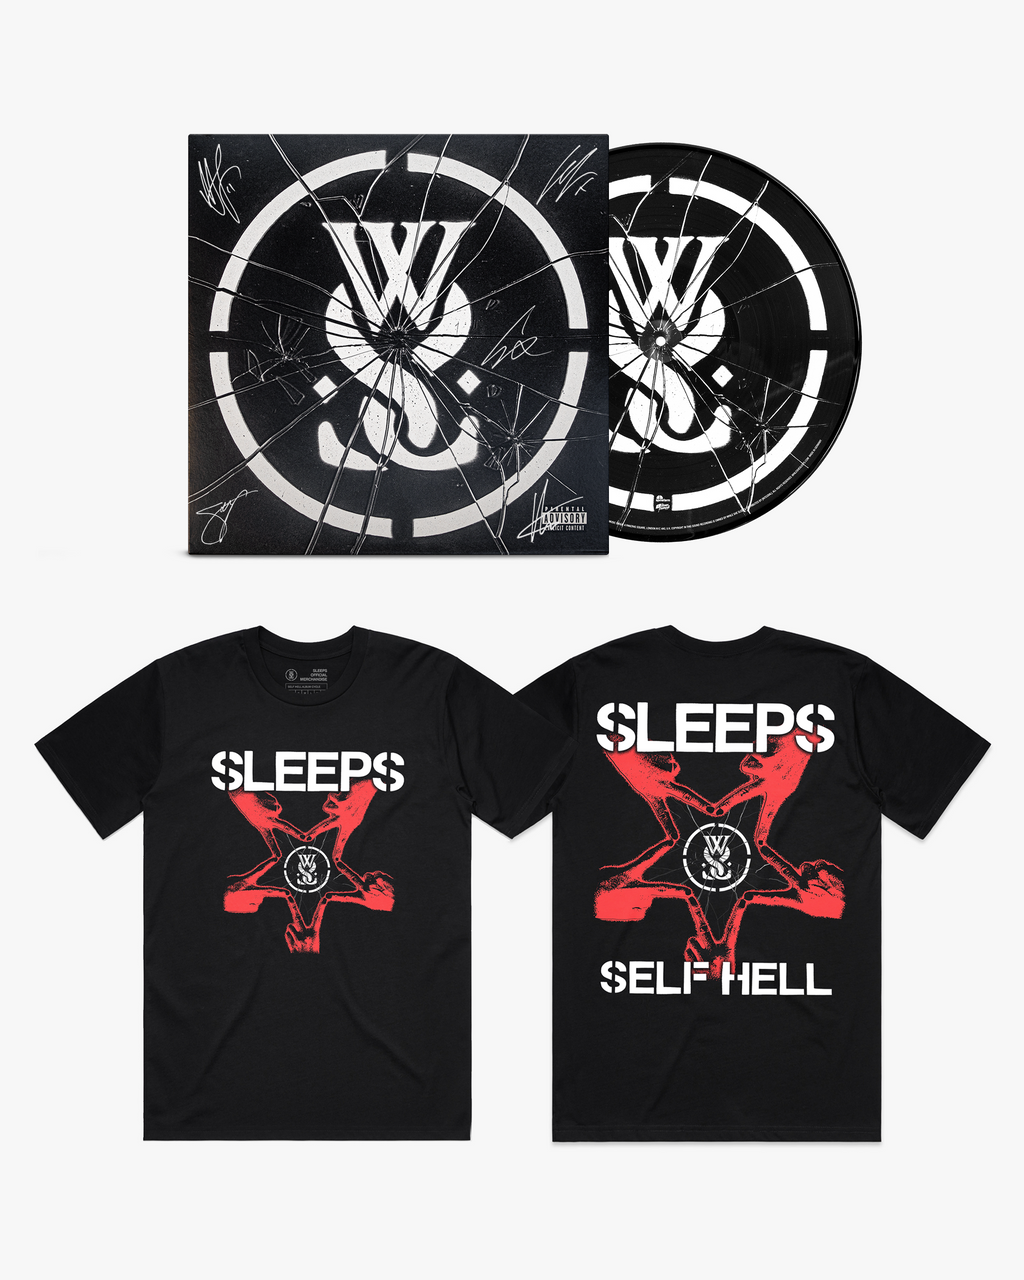 SELF HELL PICTURE DISK VINYL + T-SHIRT BUNDLE (SIGNED)